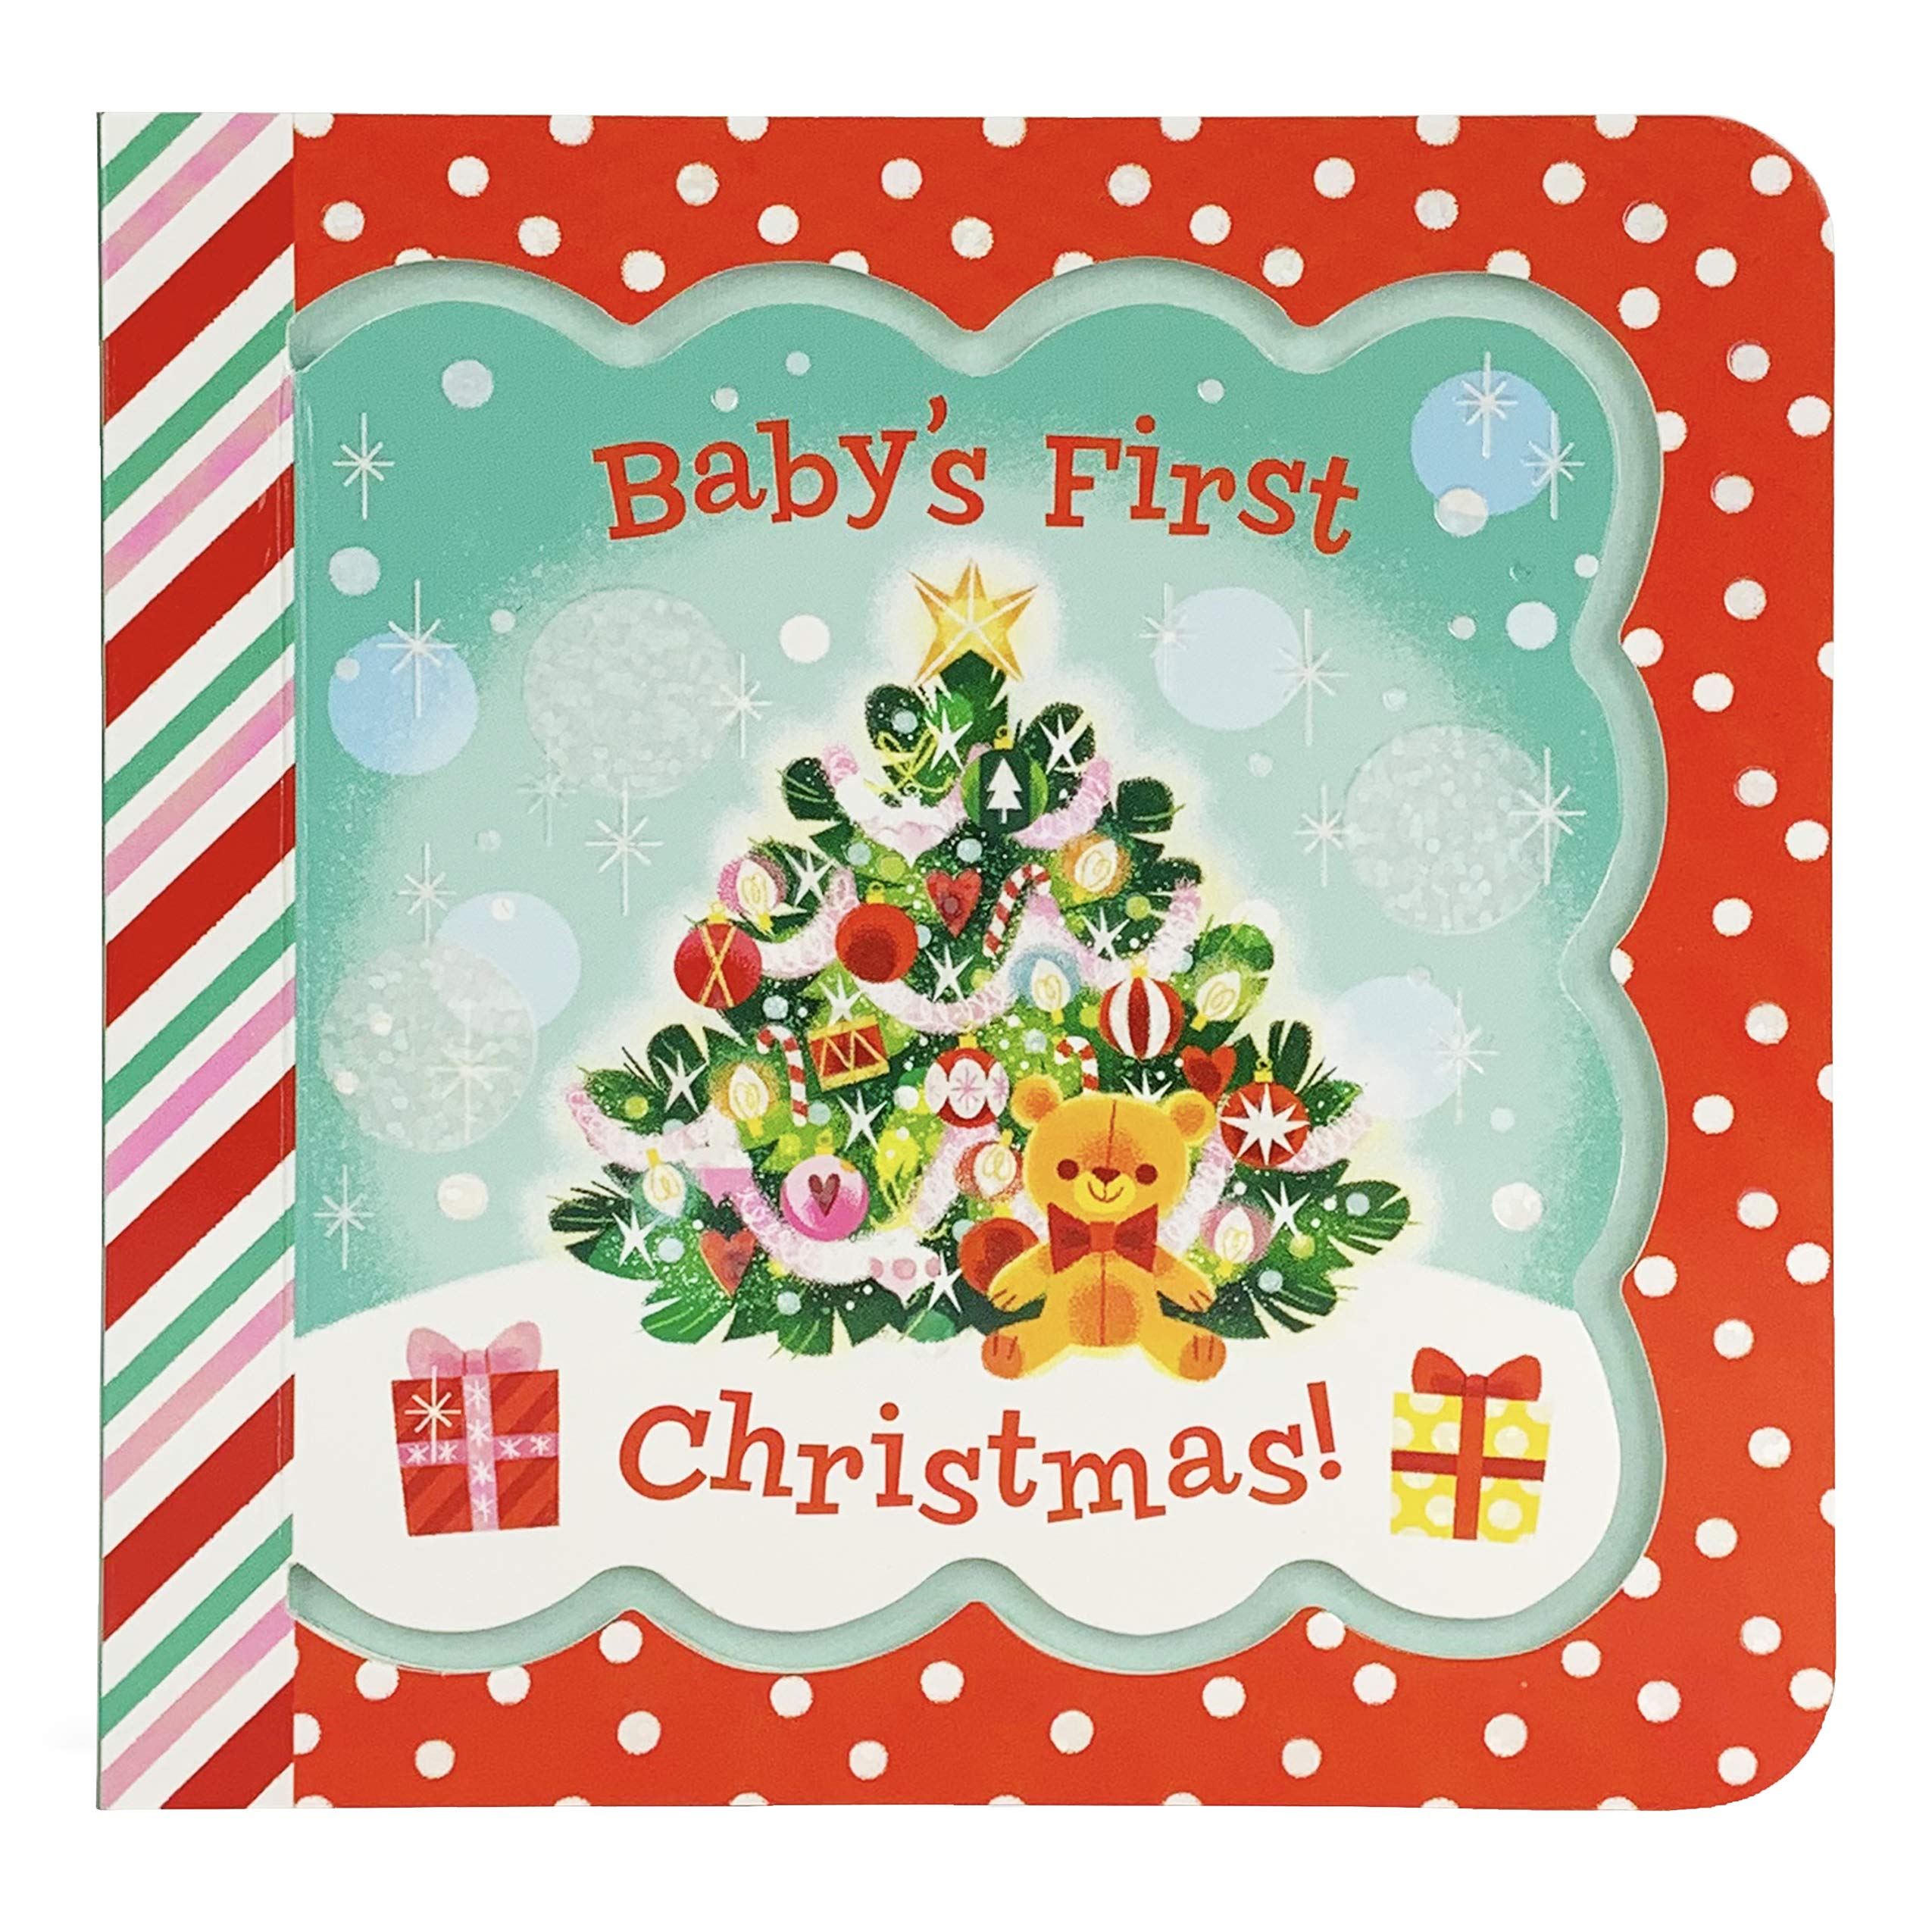 Baby's First Christmas Greeting Card Board Book (Includes Envelope and Foil Sticker) For Newborns, 0-12 Months (Little Bird Greetings Keepsake Book)